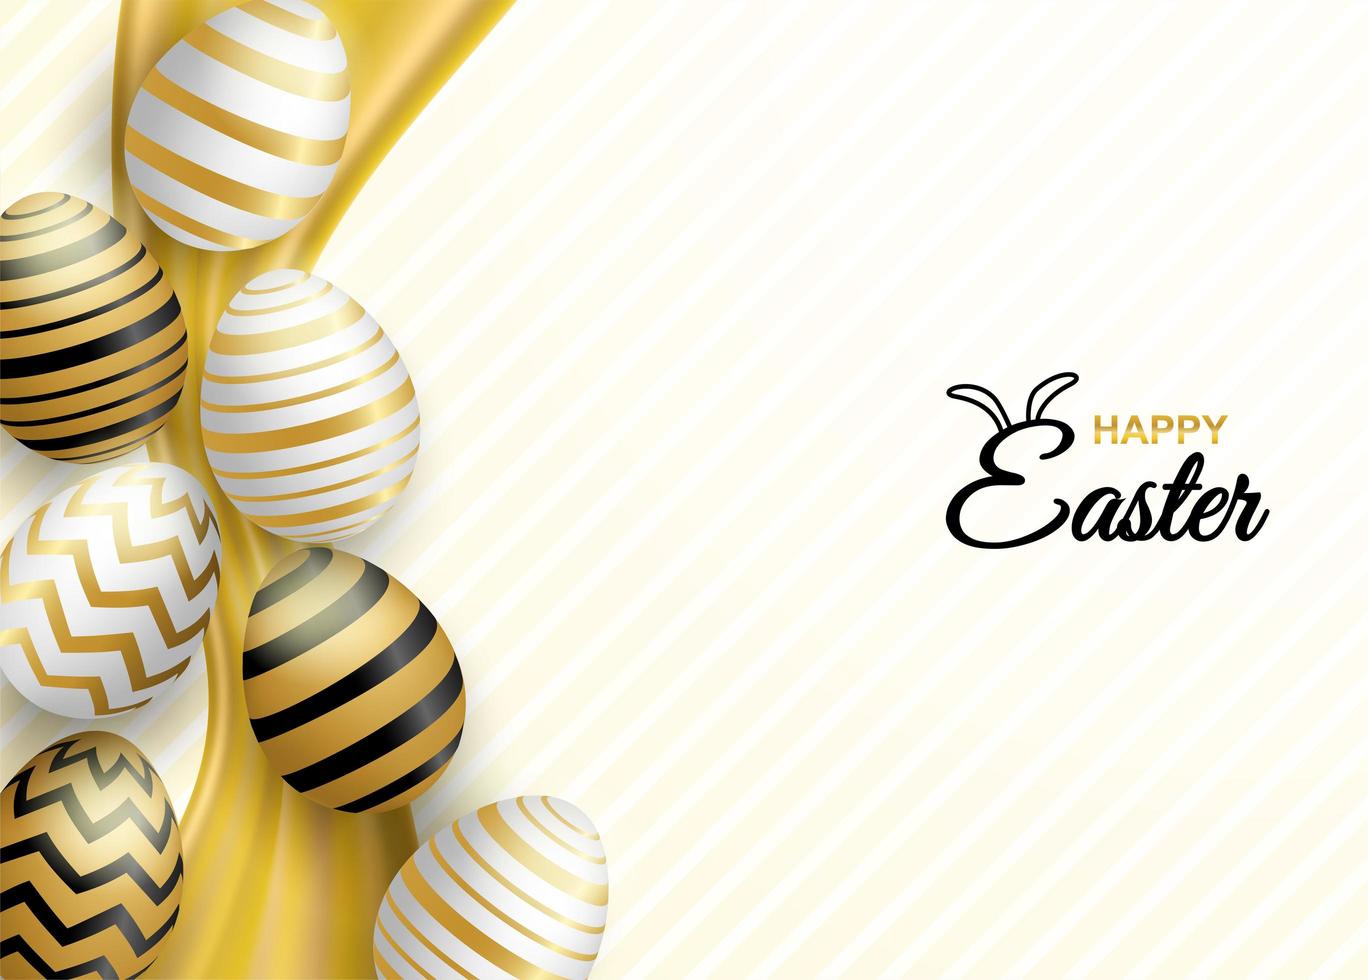 Easter celebration greeting with gold and white easter eggs vector